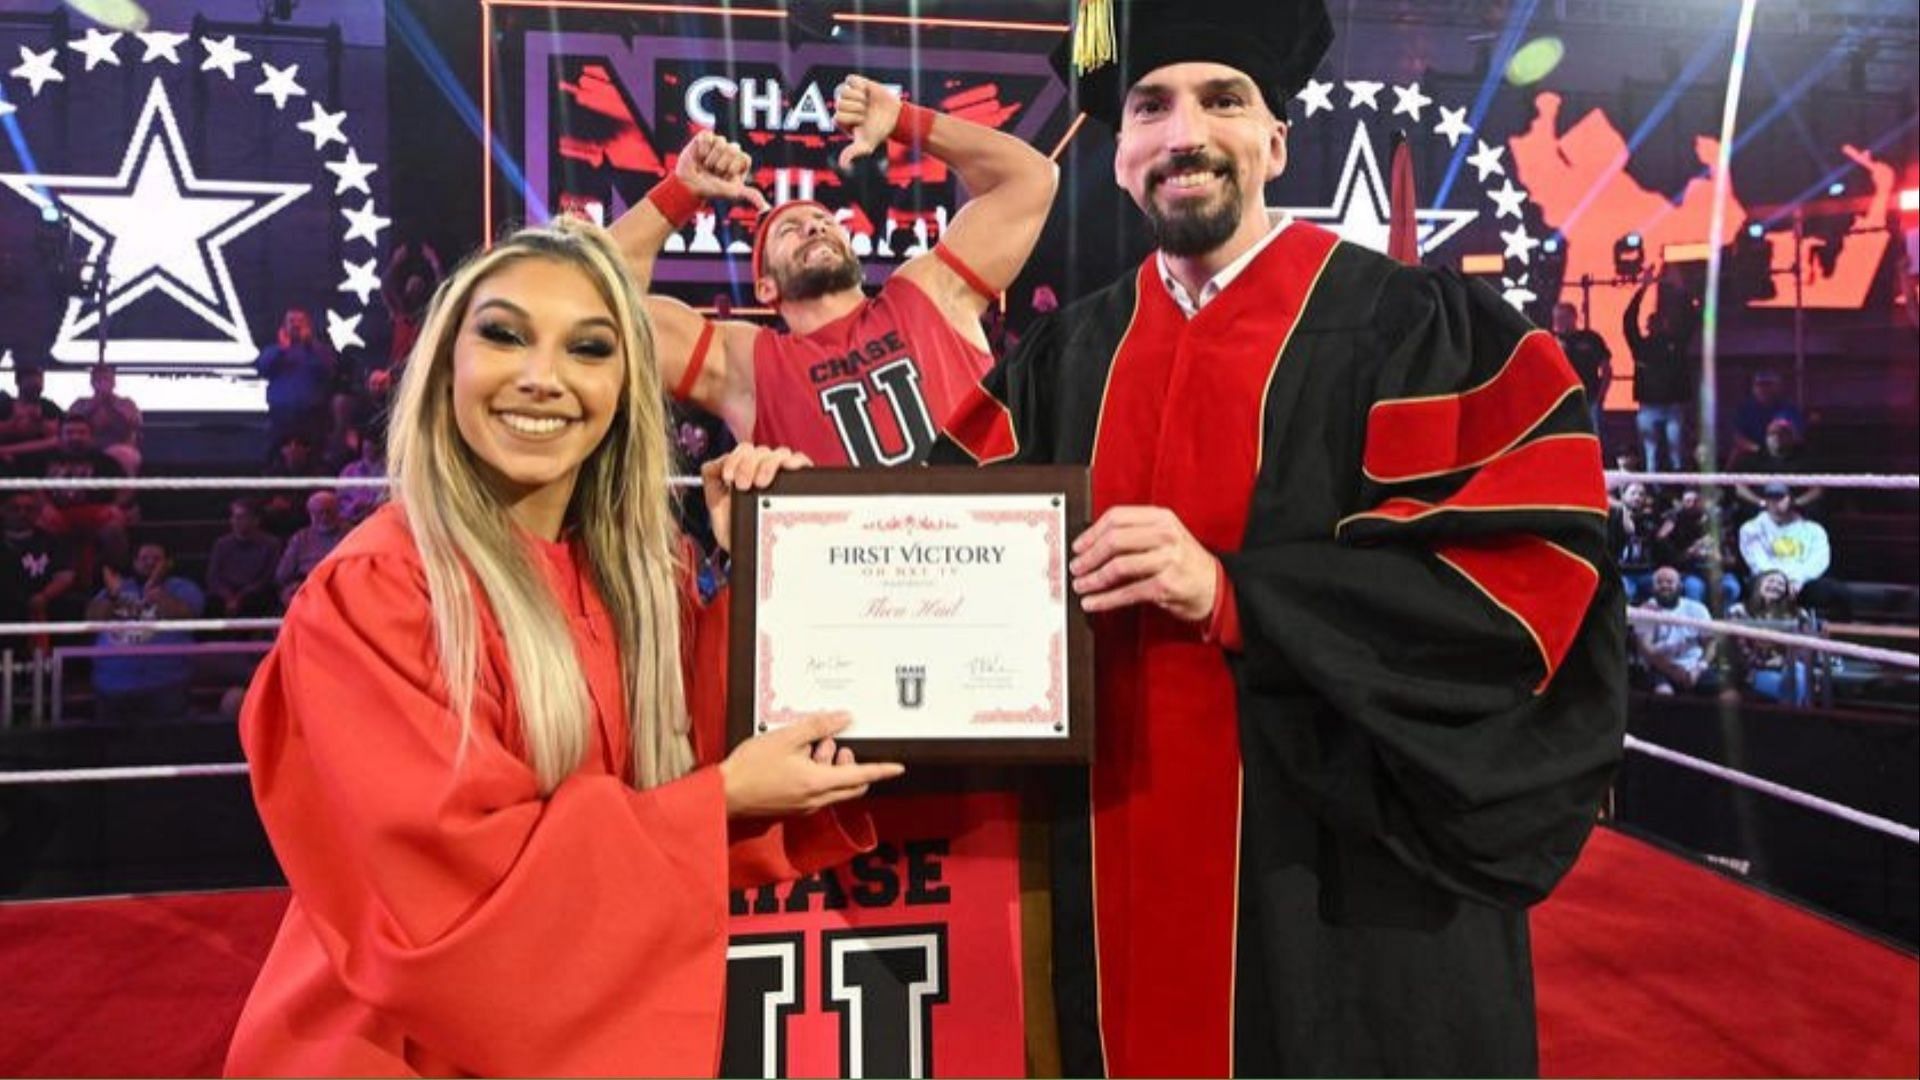 Who are the members of Chase University? Meet the new NXT Tag Team